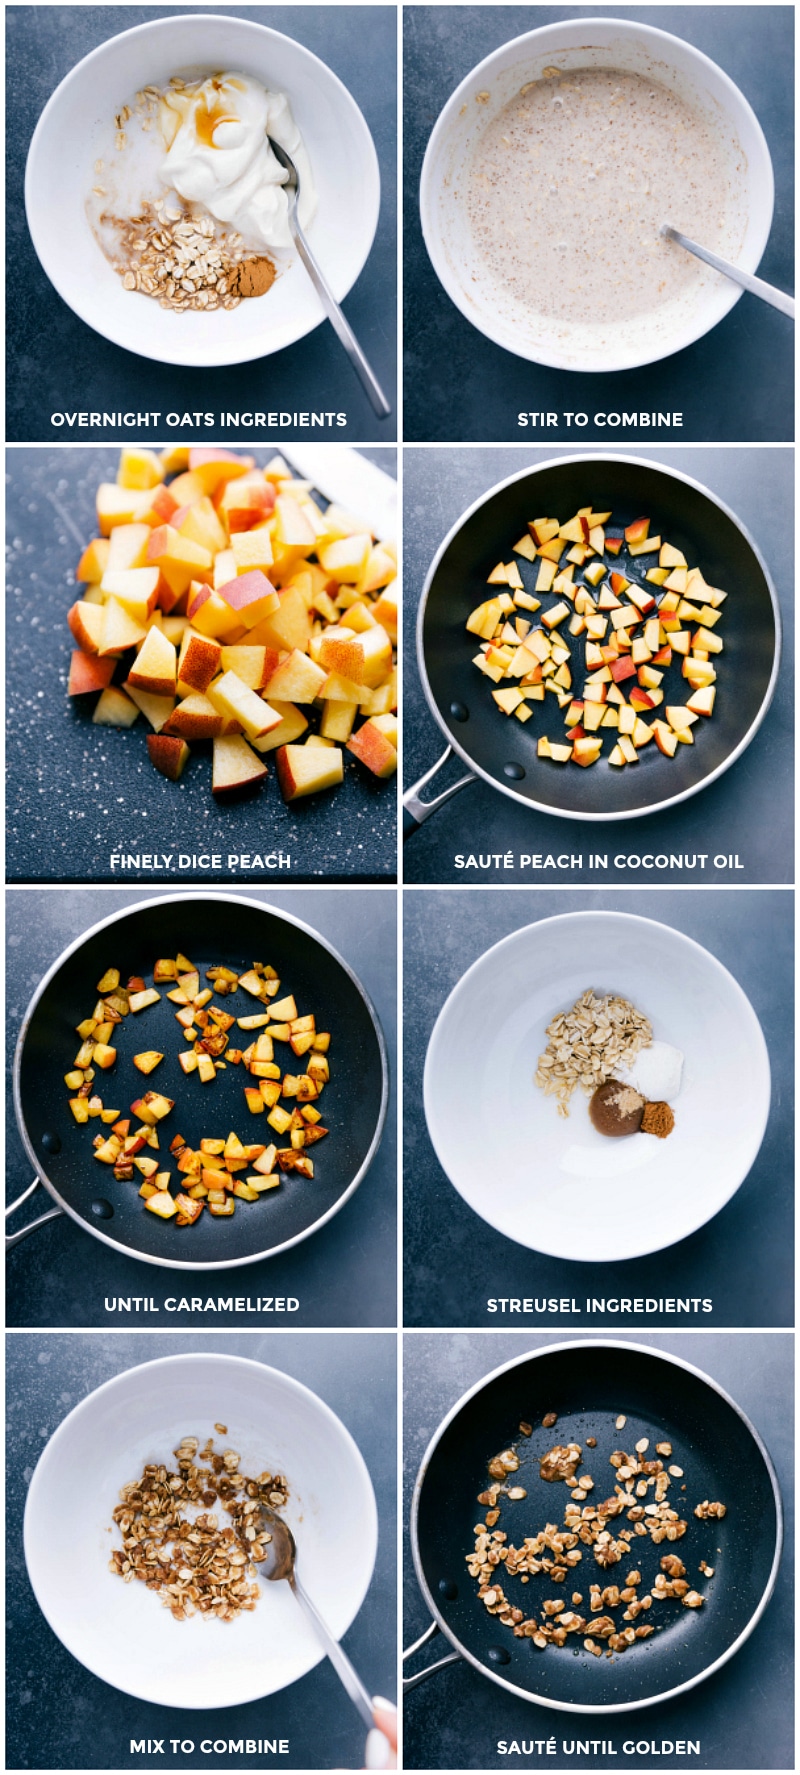 Process shots-- images of all the ingredients being mixed together for Peach Overnight Oats; the fresh peaches being caramelized; and the streusel being prepared.